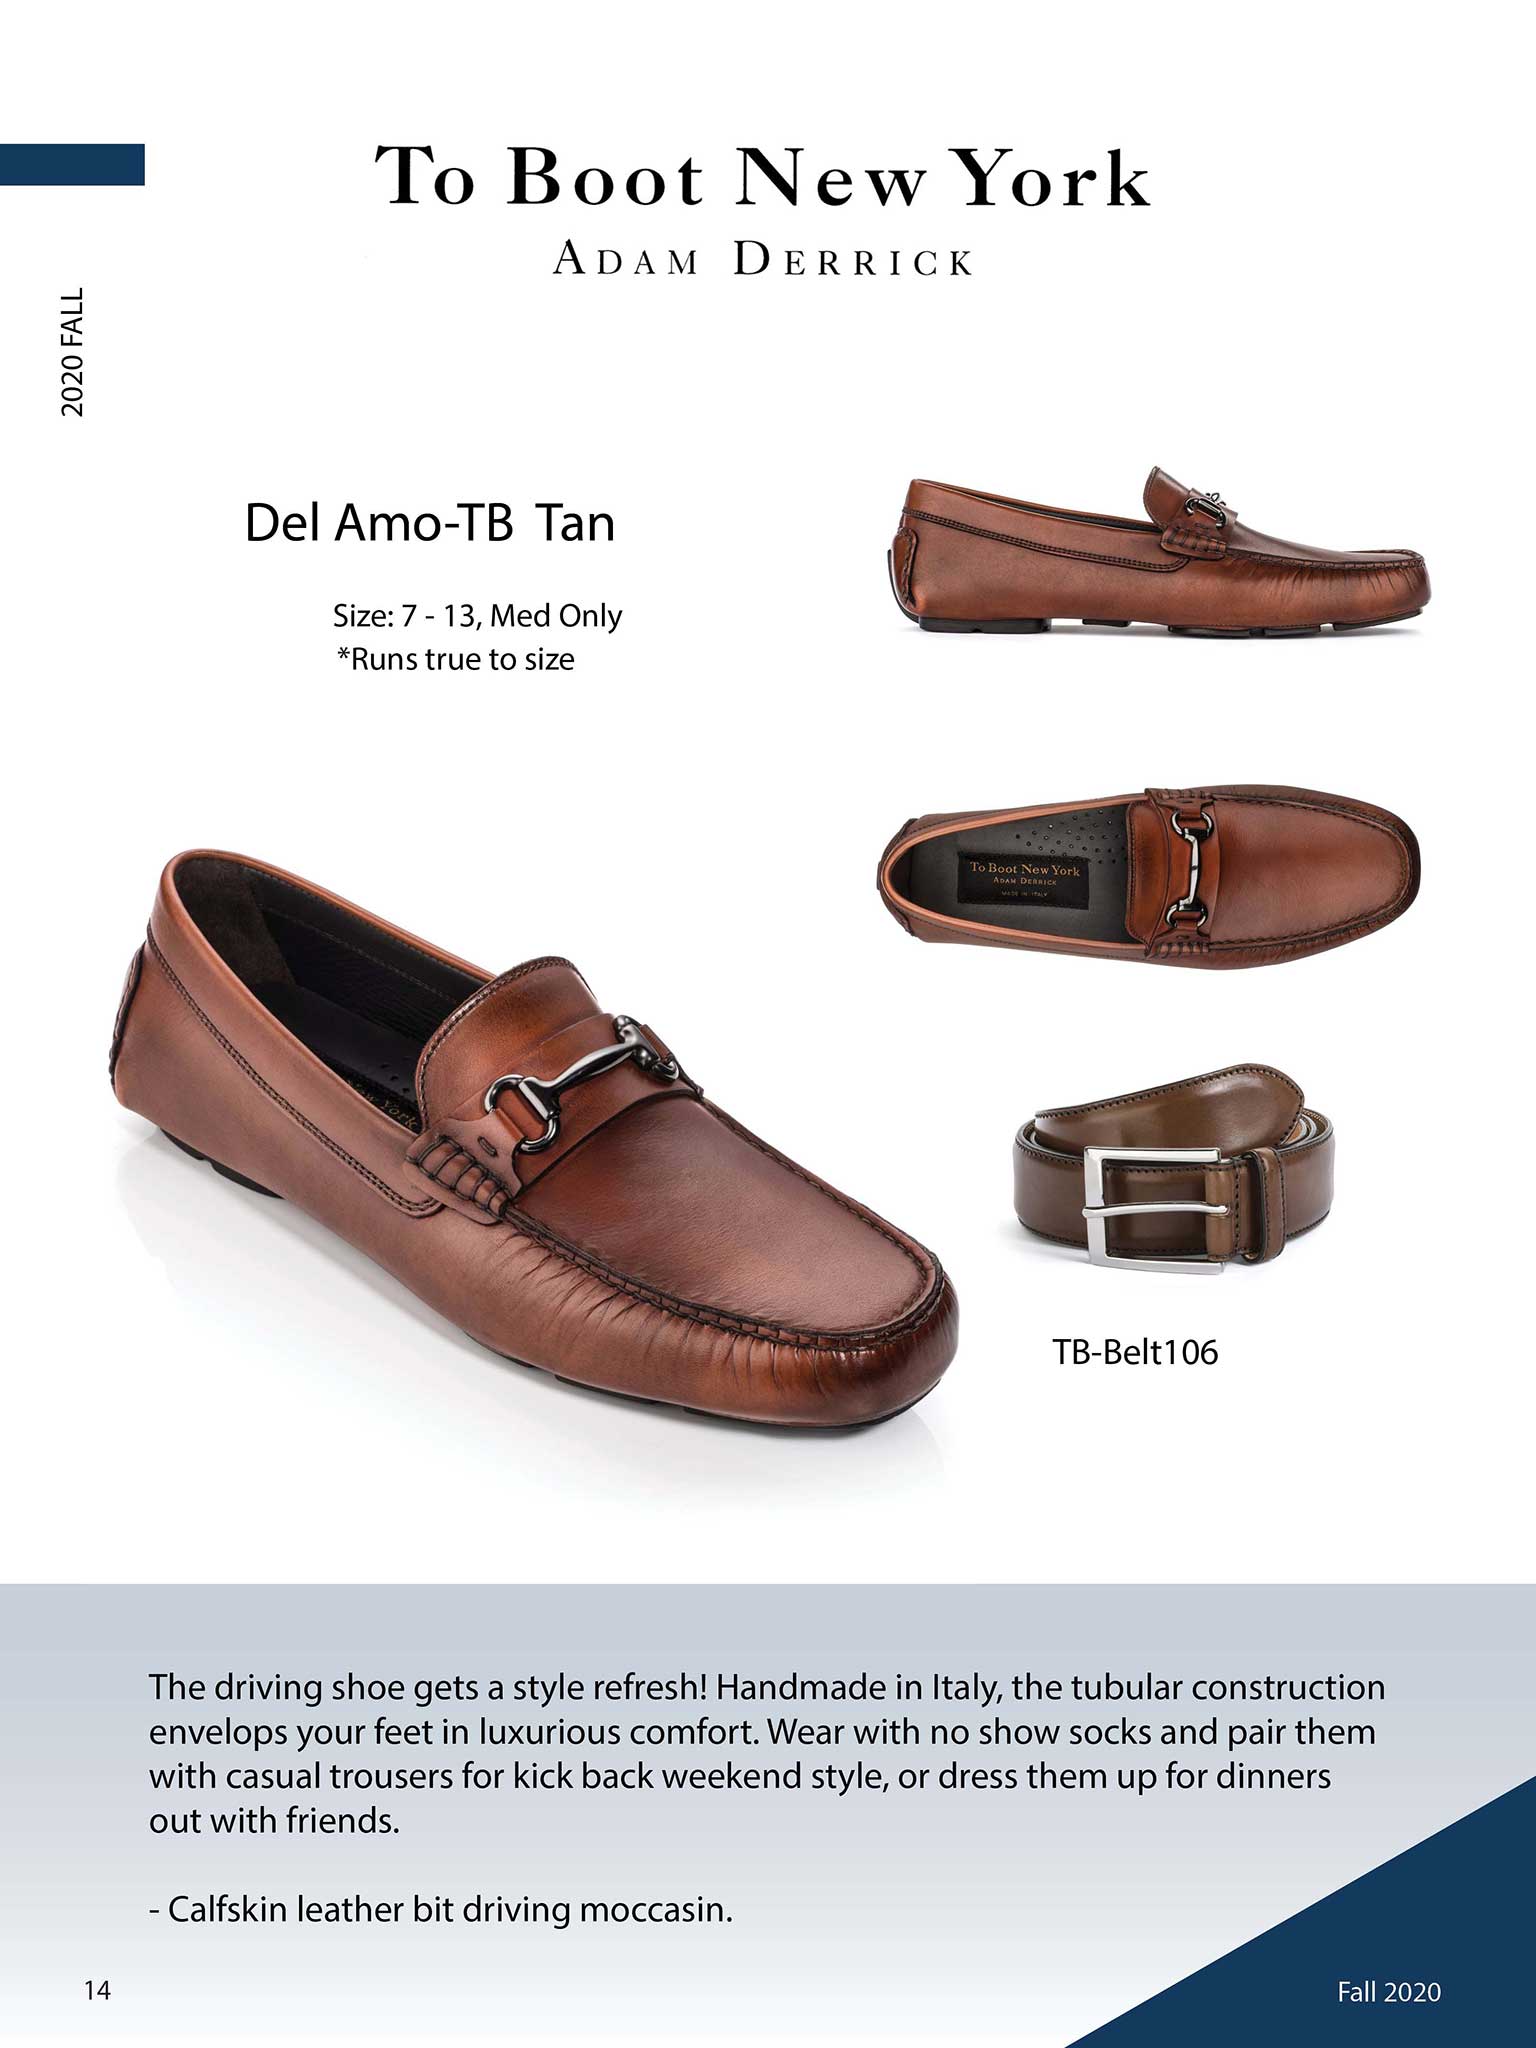 Del Amo in Tan by To Boot New York